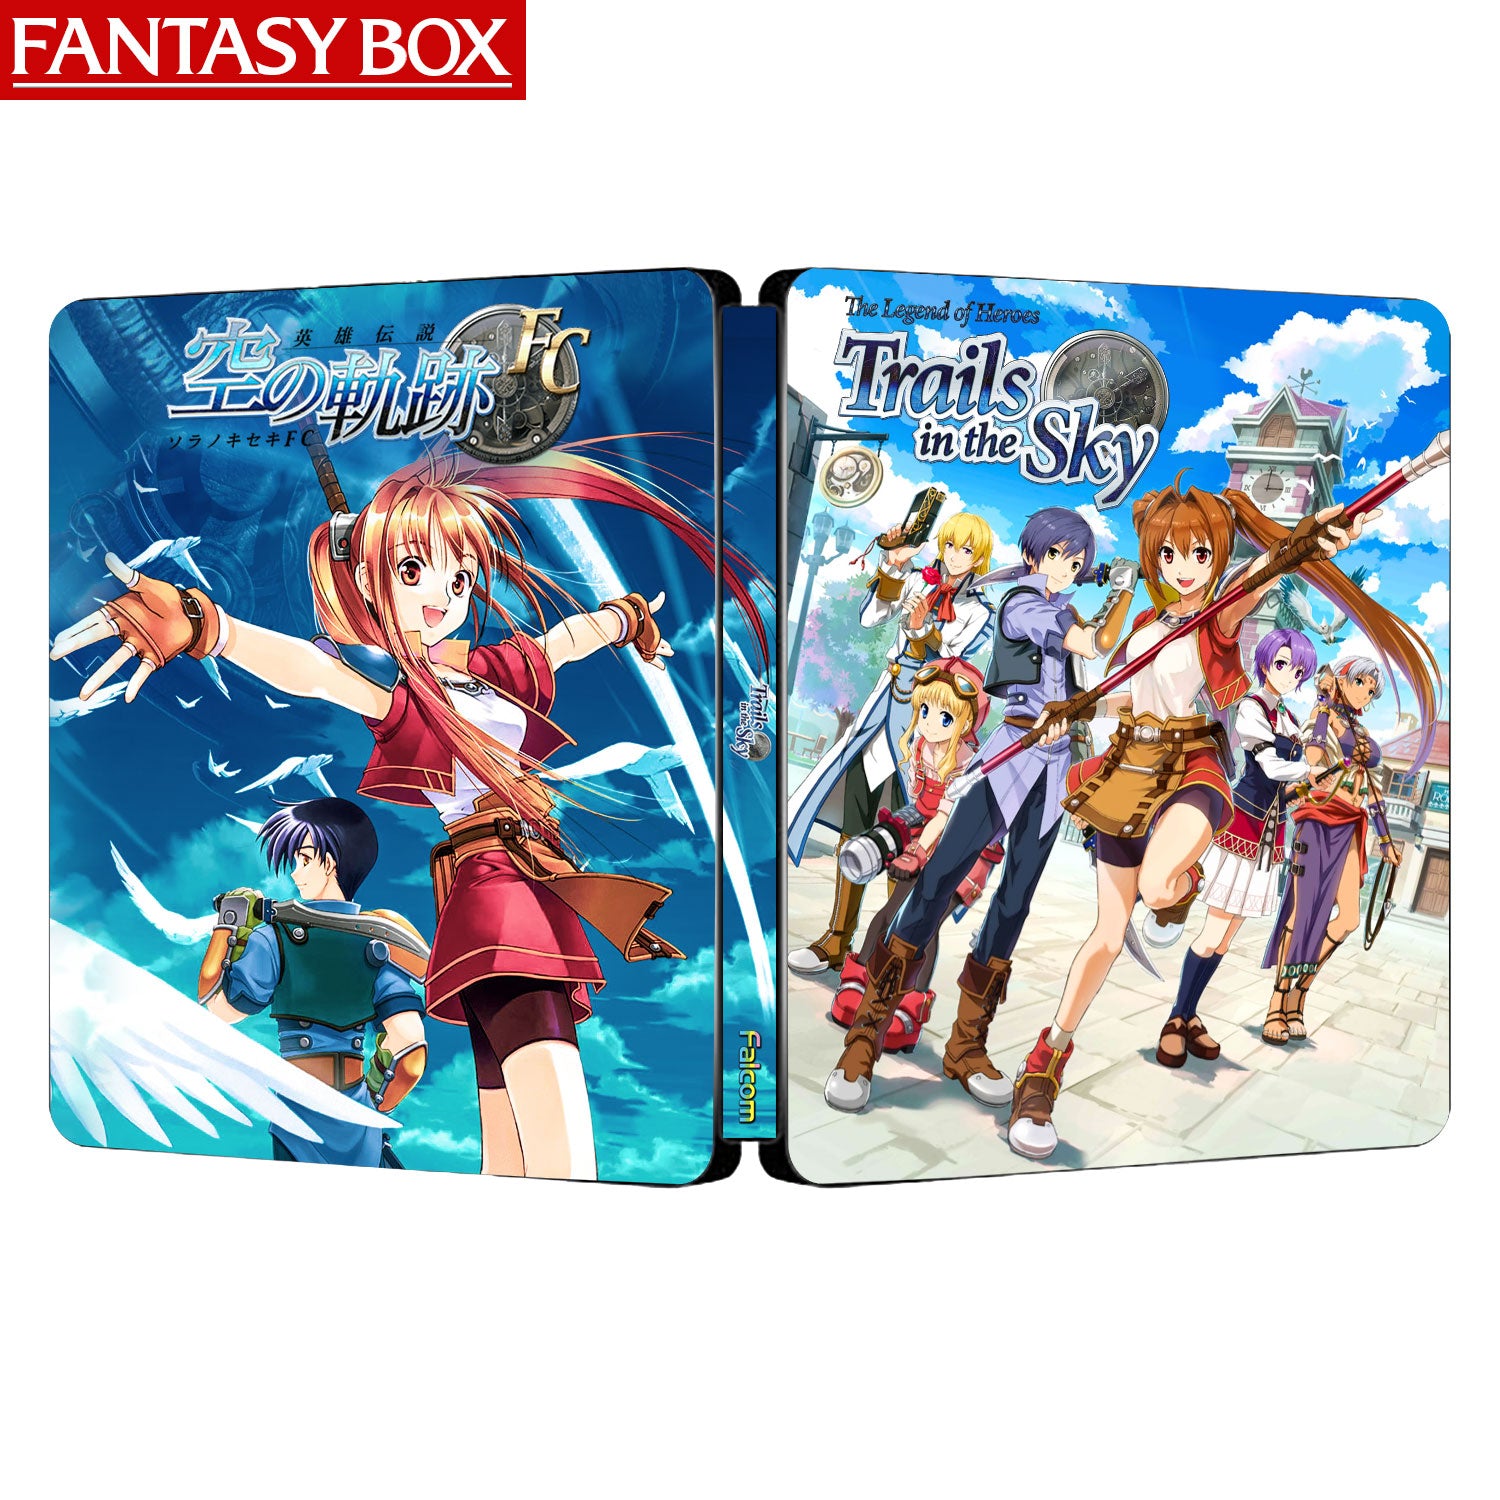 The Legend of Heroes Trails in the Sky FC(First Chapter) Steelbook FantasyBox Artwork